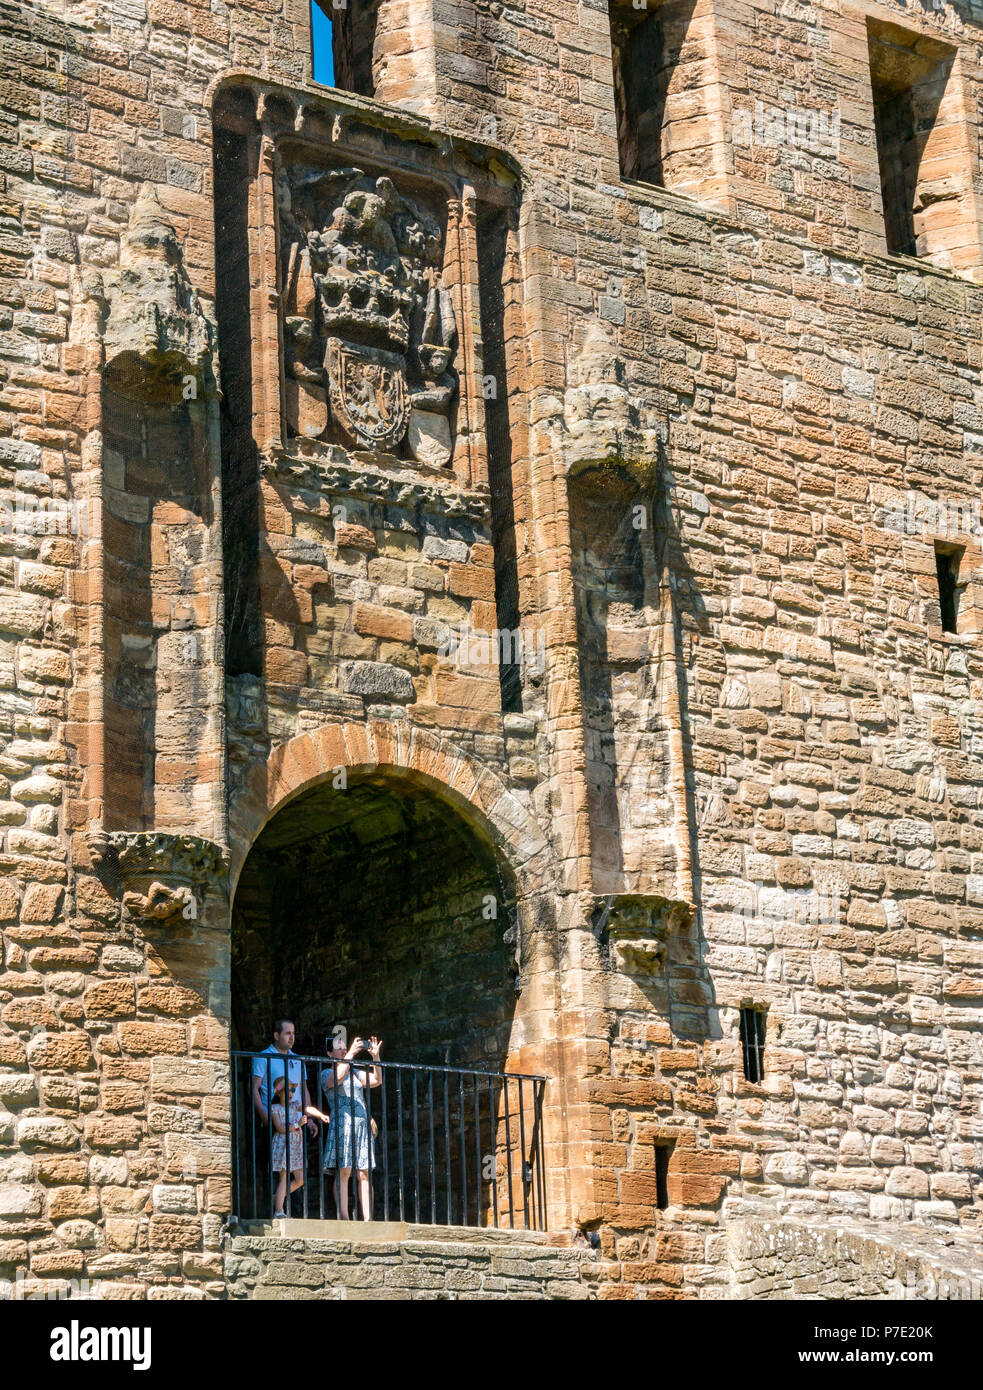 Visitors framed in ruined entrance overlooking grounds with woman taking a photo, Linlithgow Palace, West Lothian, Scotland, UK Stock Photo